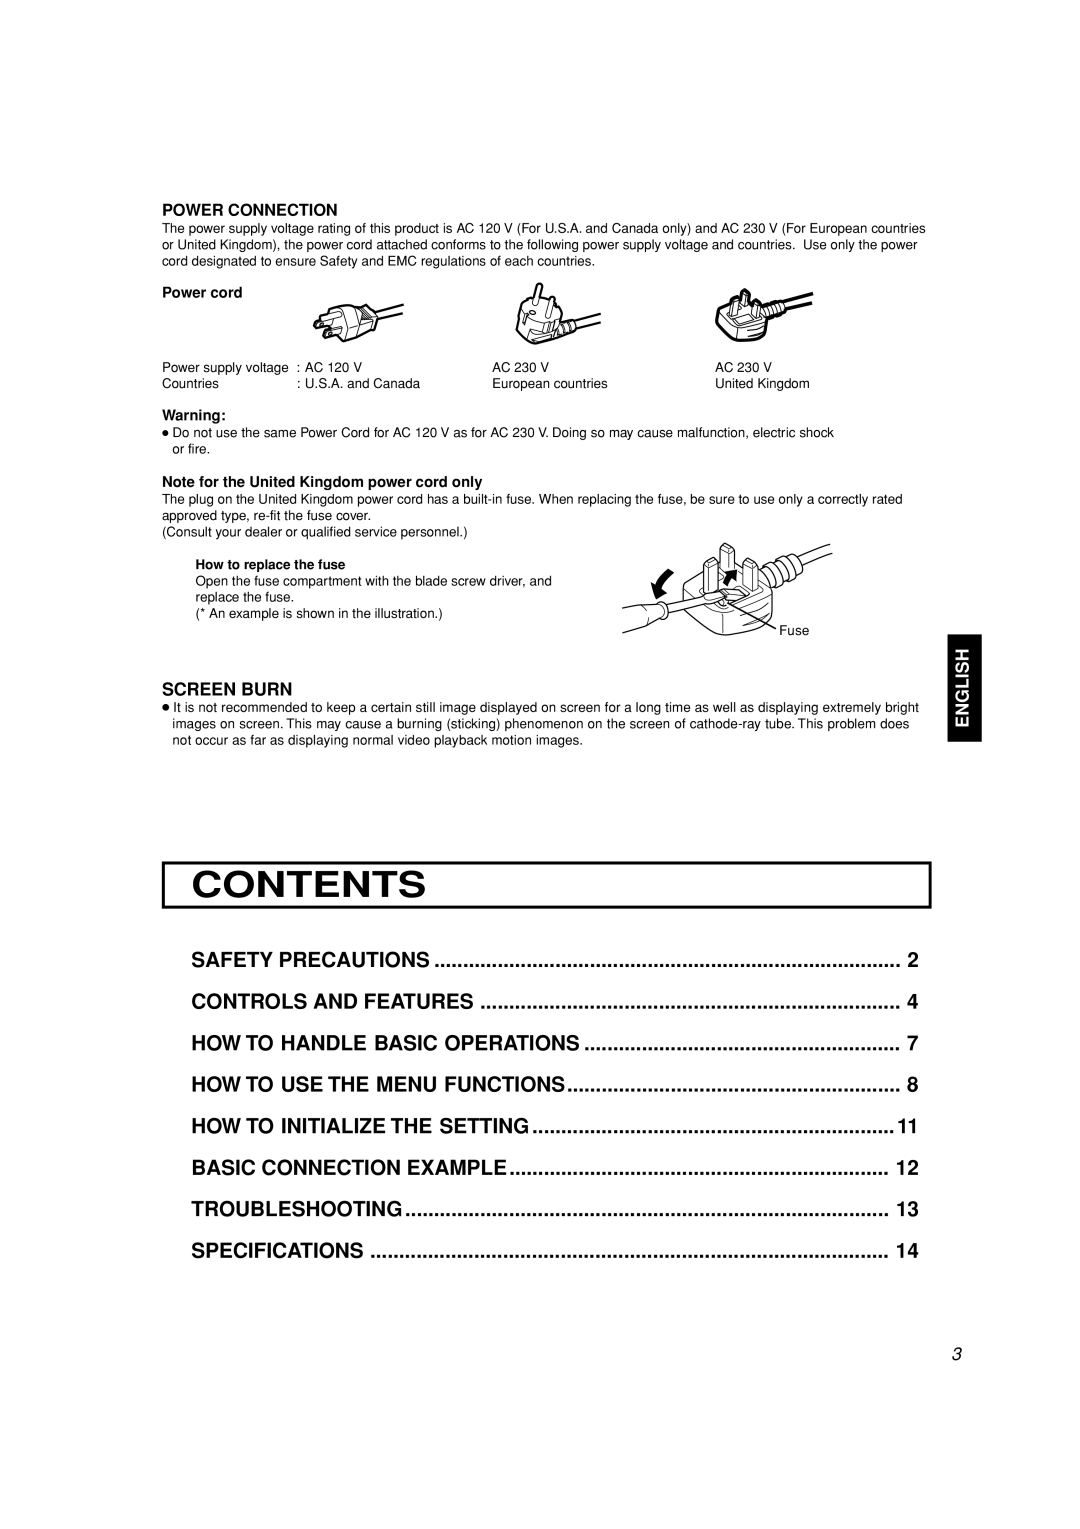 JVC TM-A101G Contents, Safety Precautions, Controls And Features, How To Use The Menu Functions, Basic Connection Example 